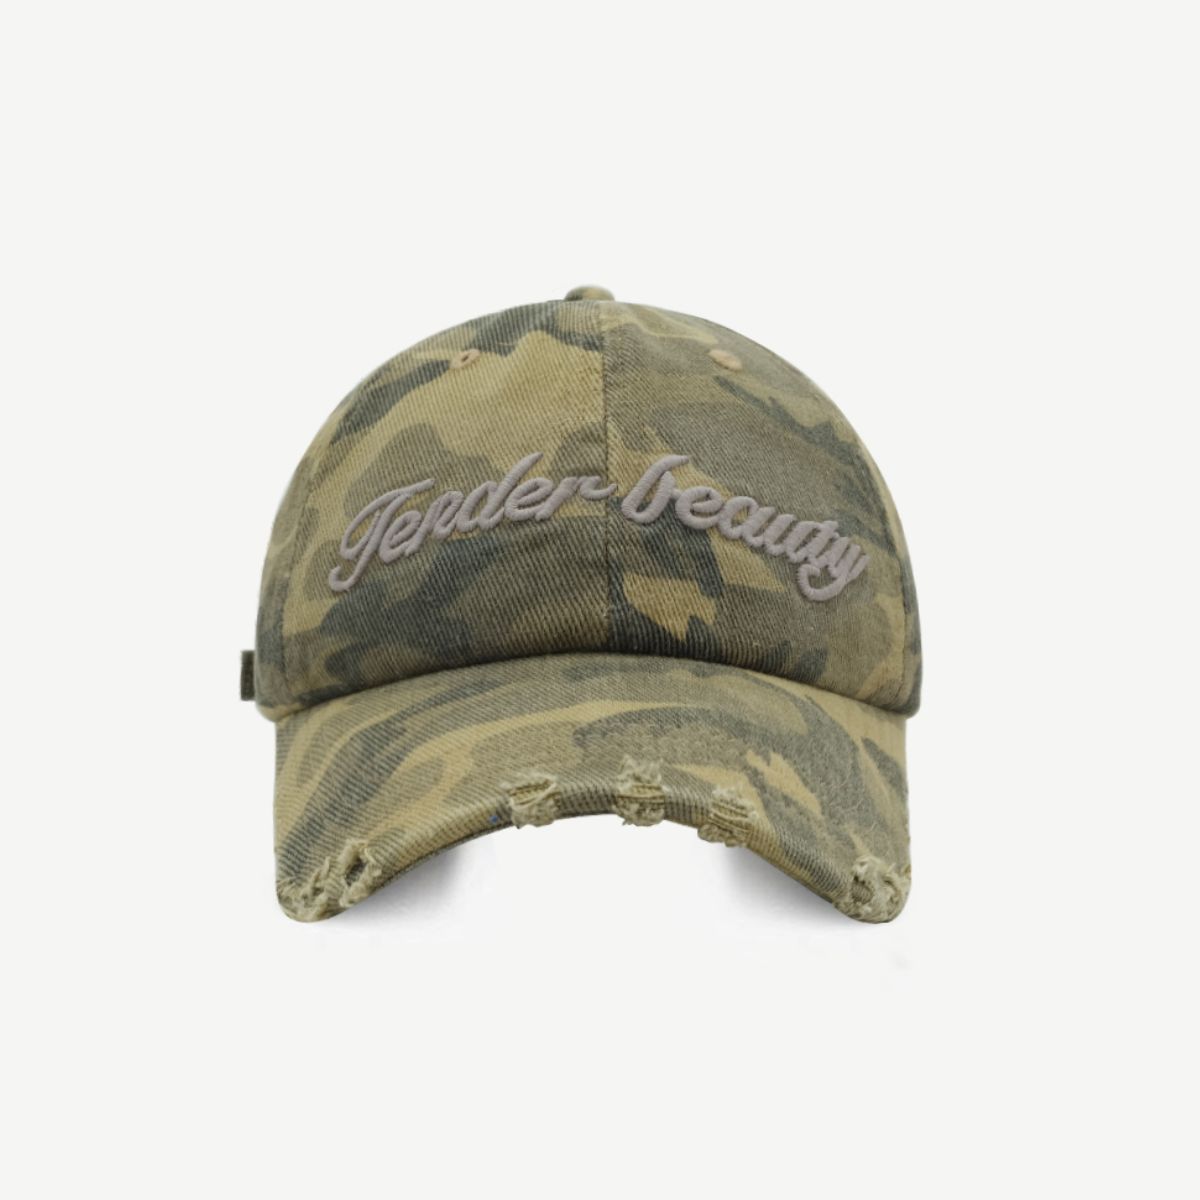 TEEK - Letter Graphic Camouflage Cotton Hat HAT TEEK Trend Chartreuse  